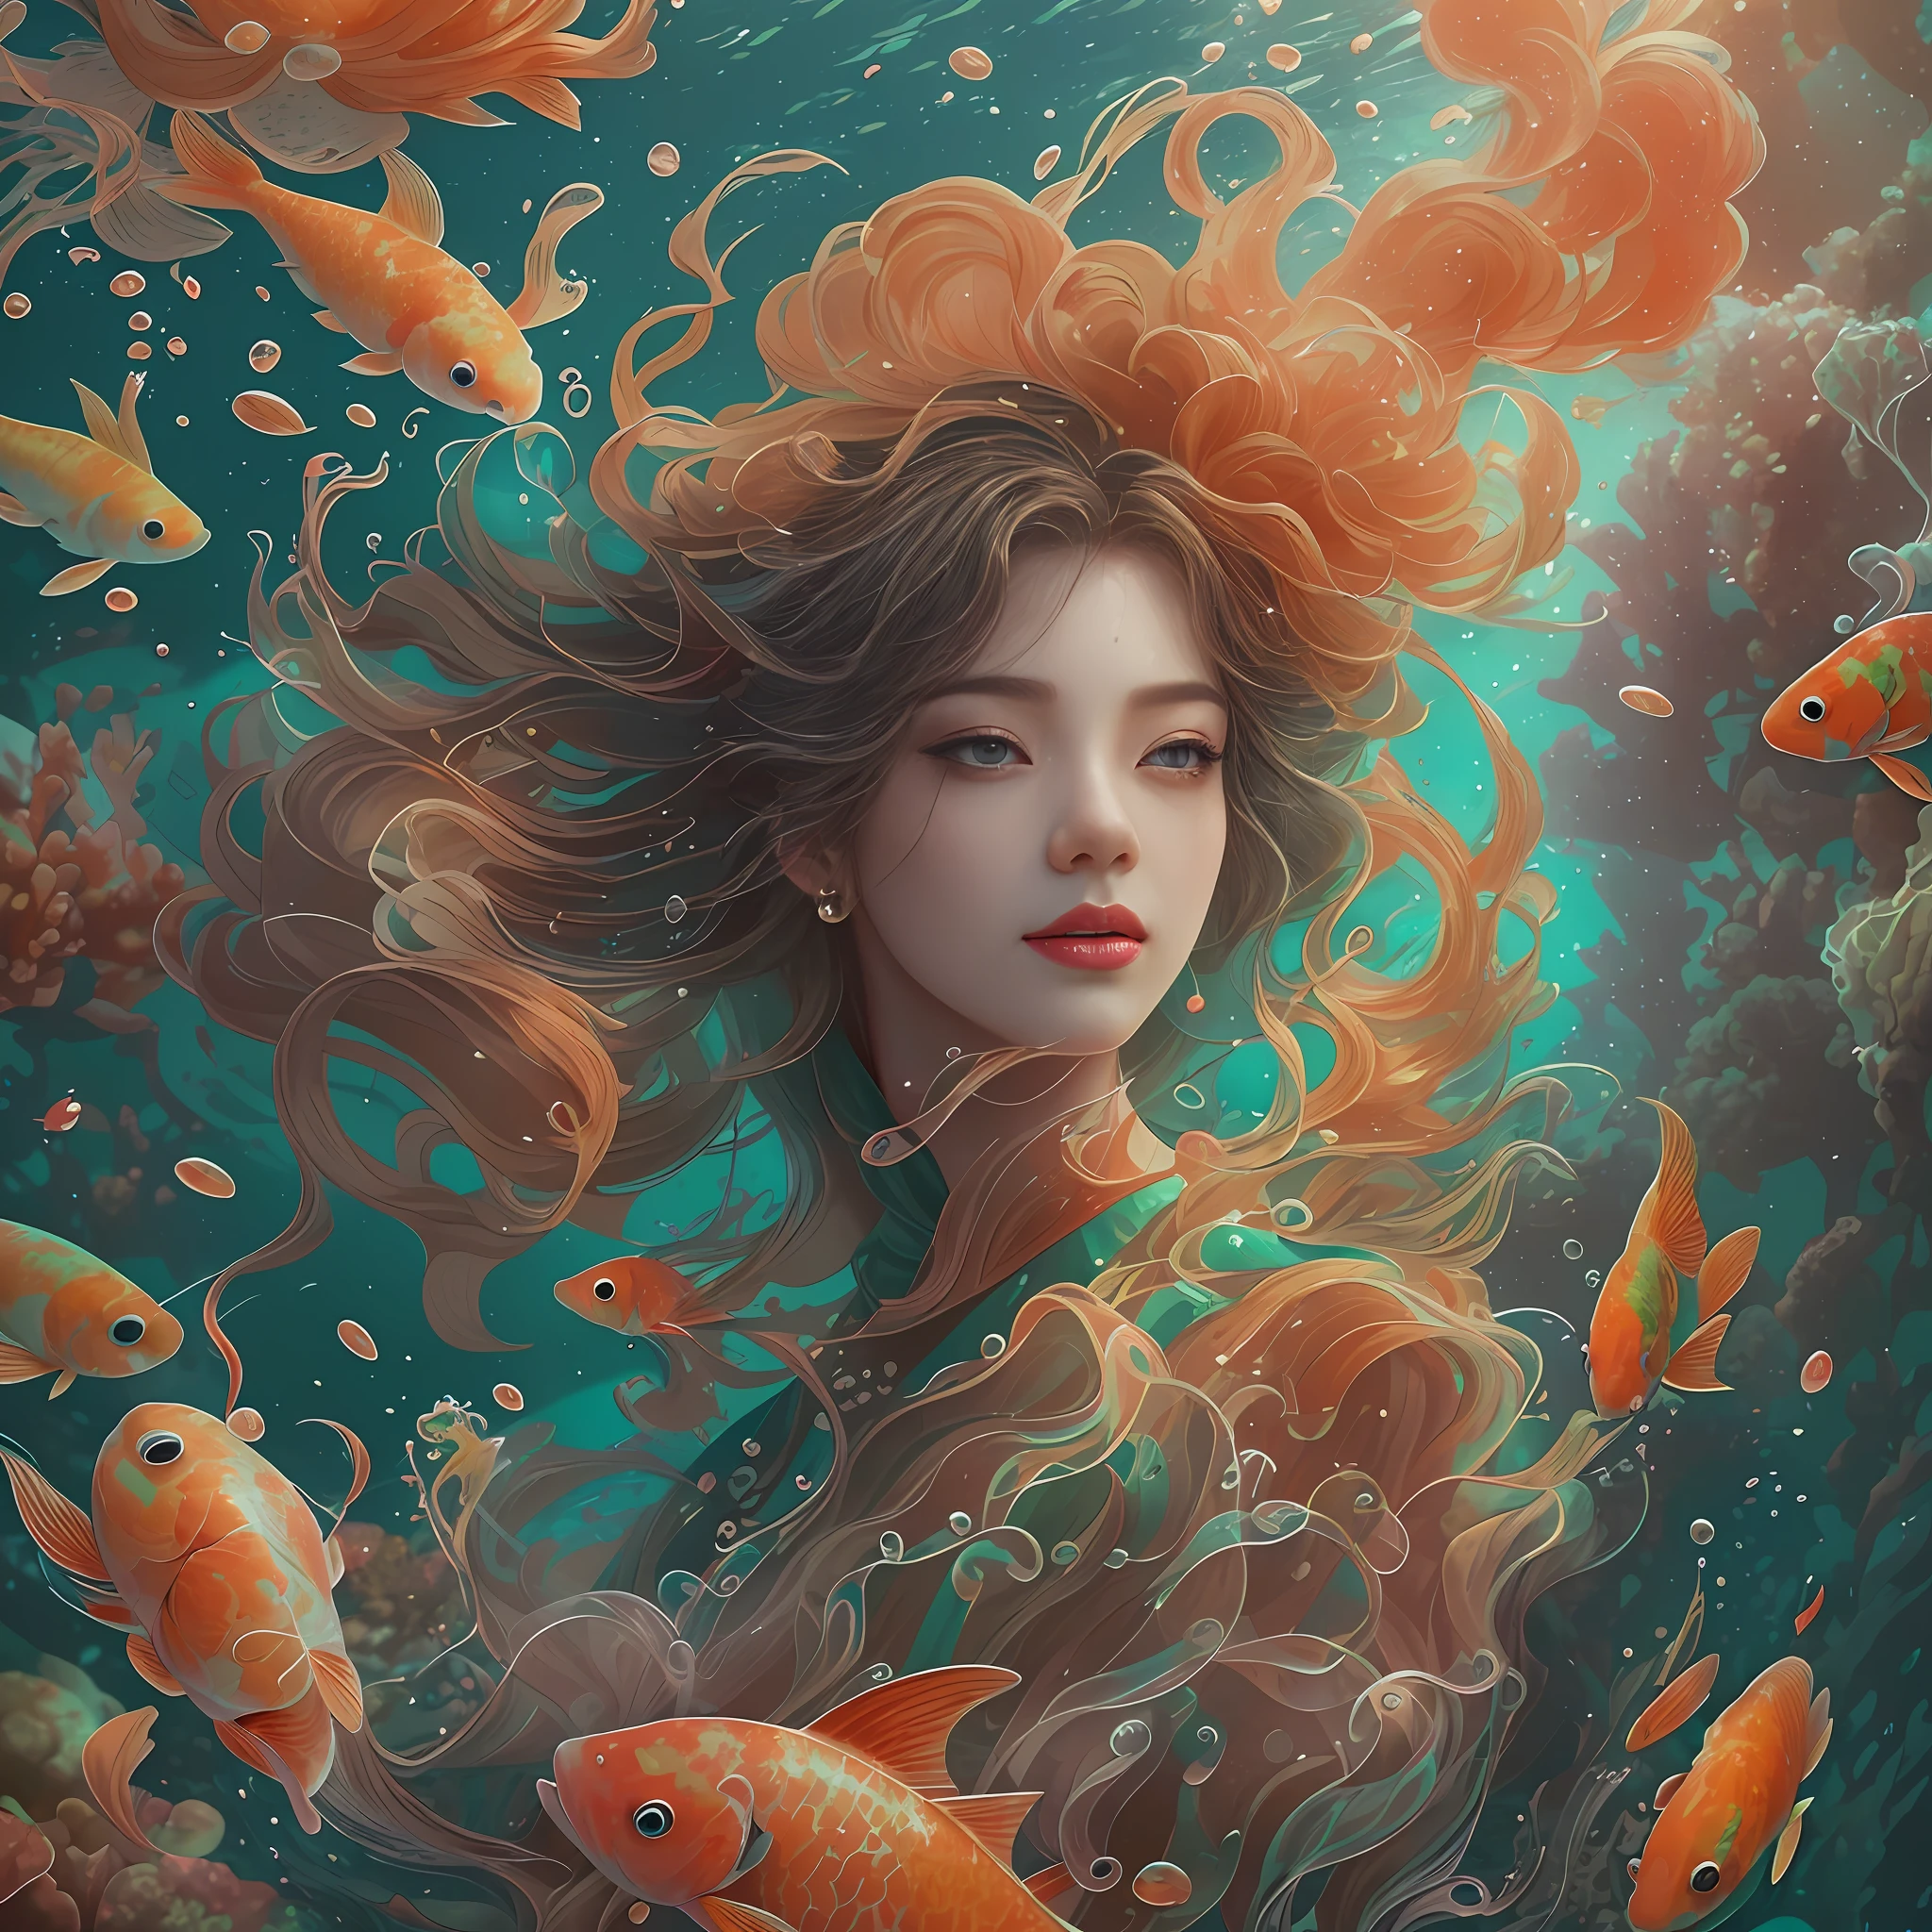 ModelShoot style, (Extremely detailed Cg Unity 8K wallpaper), A chaotic storm of intricate liquid smoke in the head, Stylized abstract portrait of beautiful girl, wetted skin,Koi，Beautiful koi，Flocks of koi,carp，Strange shaped corals，ocean floor，Beautiful coral reef in the background，Rochas,Marine life，colorful coral reef,author：Petros Afshar, ross tran, tom whalen, Peter Mohrbacher, Art germ, Broken glass, ((bubbly underwater scenery)) Radiant light octane rendering is highly detailed, inspired by Yanjun Cheng, Beautiful digital artwork, Guviz-style artwork, 8K highly detailed digital art, Beautiful digital illustration, Cute detailed digital art, stunning digital illustration, A beautiful artwork illustration, Exquisite digital illustration,8K detailed digital art,